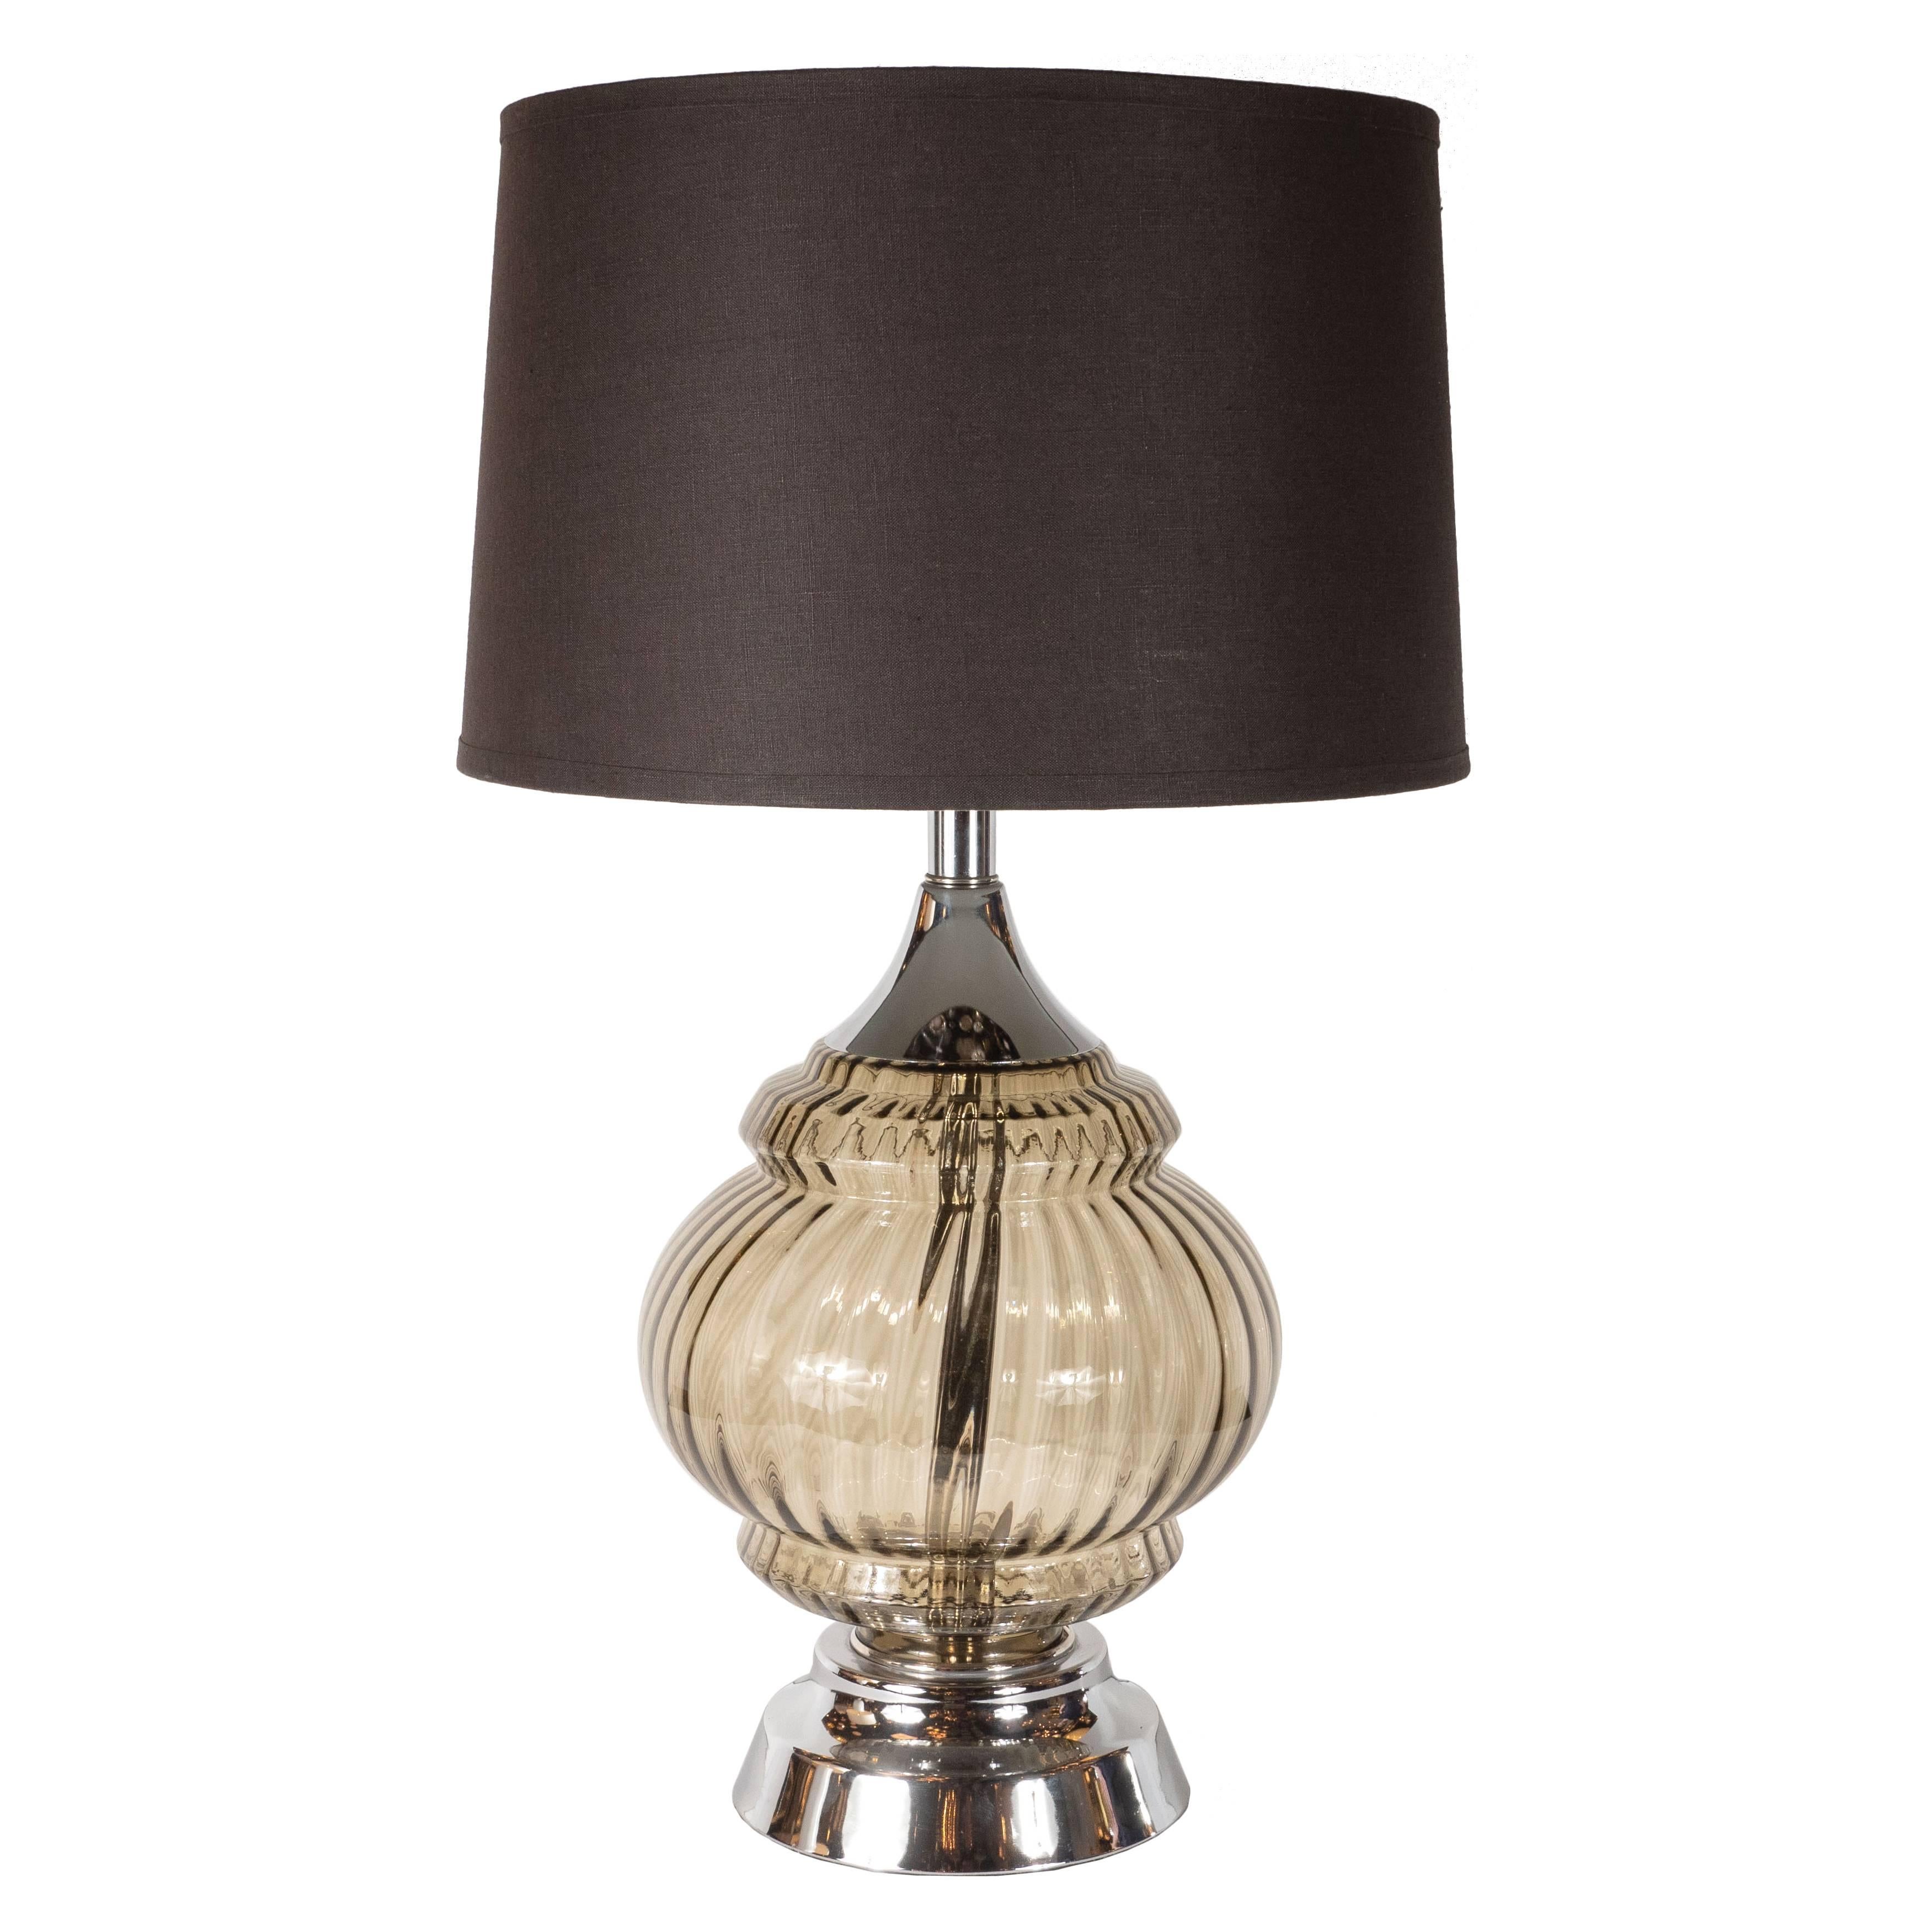 Mid-Century Modern Smoked and Ribbed Glass Table Lamp with Chrome Fittings